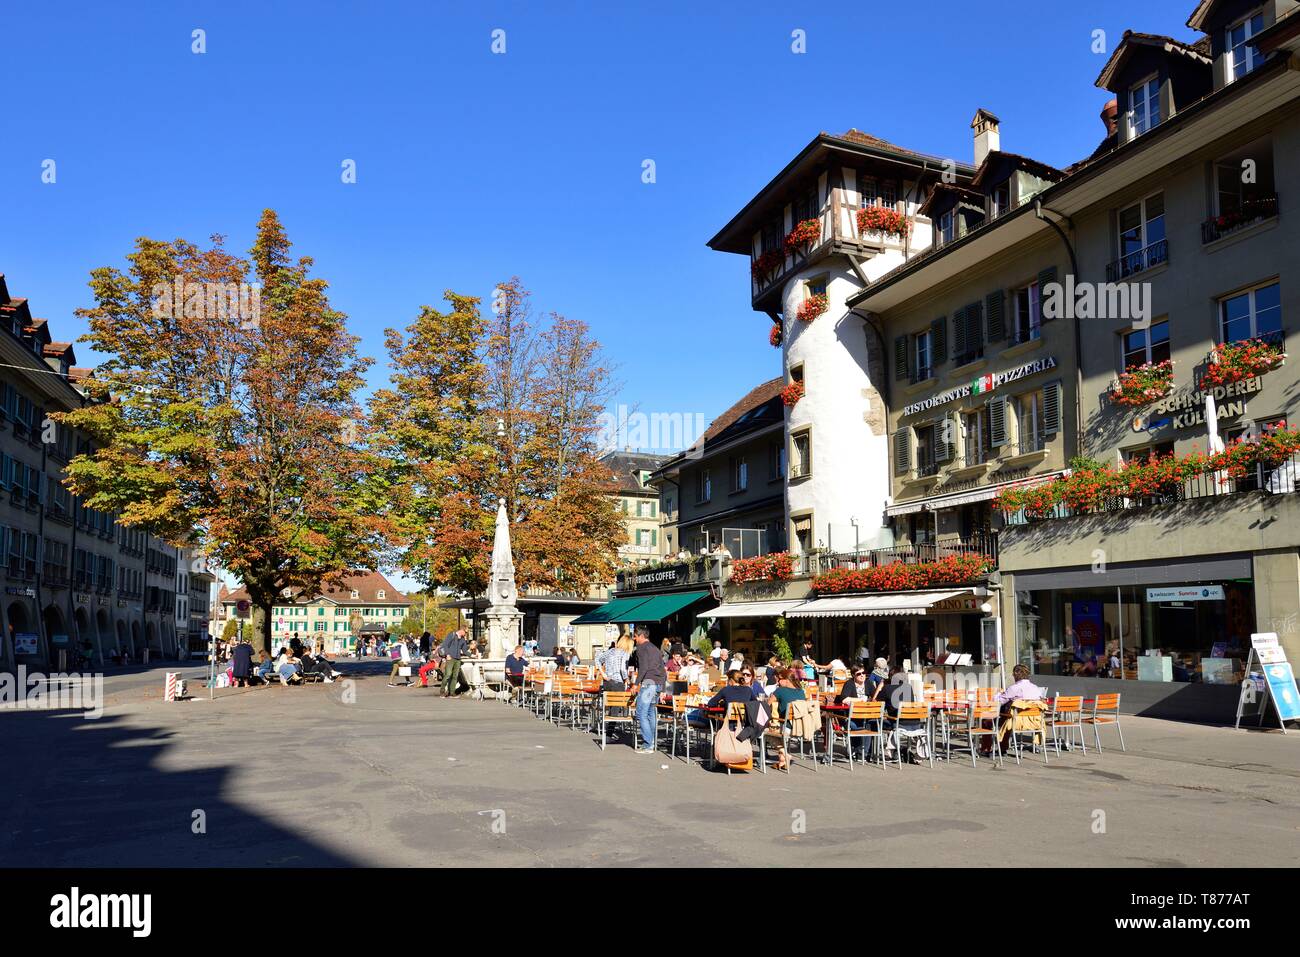 Switzerland, canton of Berne, Berne, the old town listed as World Heritage by UNESCO, Waisenhausplatz Stock Photo